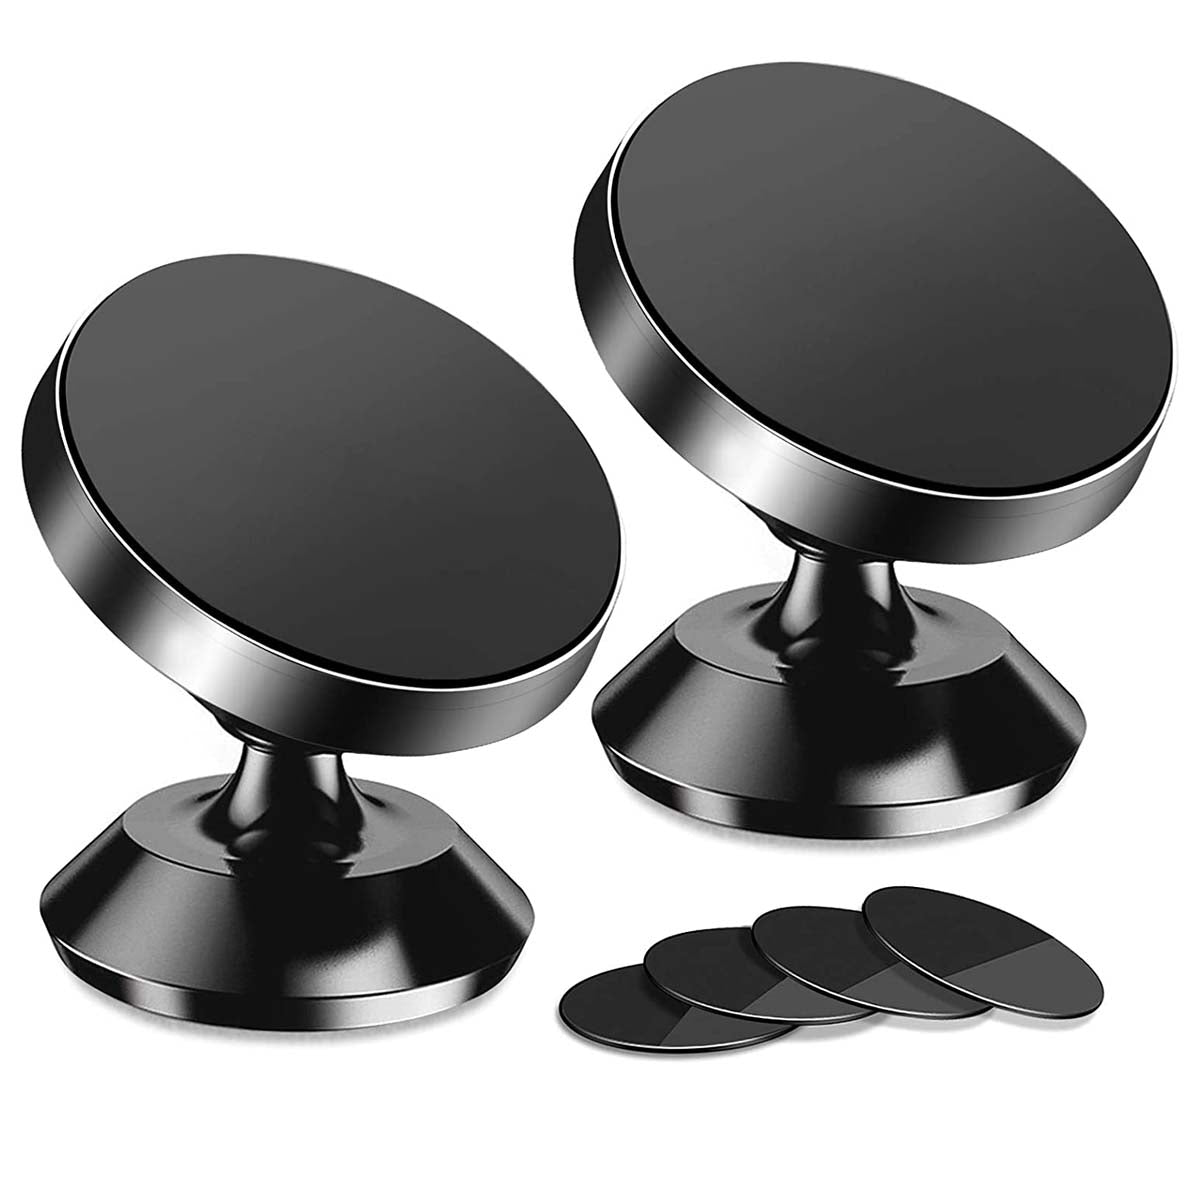 [2 Pack ] Magnetic Phone Mount, Custom For Cars, [ Super Strong Magnet ] [ with 4 Metal Plate ] car Magnetic Phone Holder, [ 360° Rotation ] Universal Dashboard car Mount Fits All Cell Phones, Car Accessories MB13982